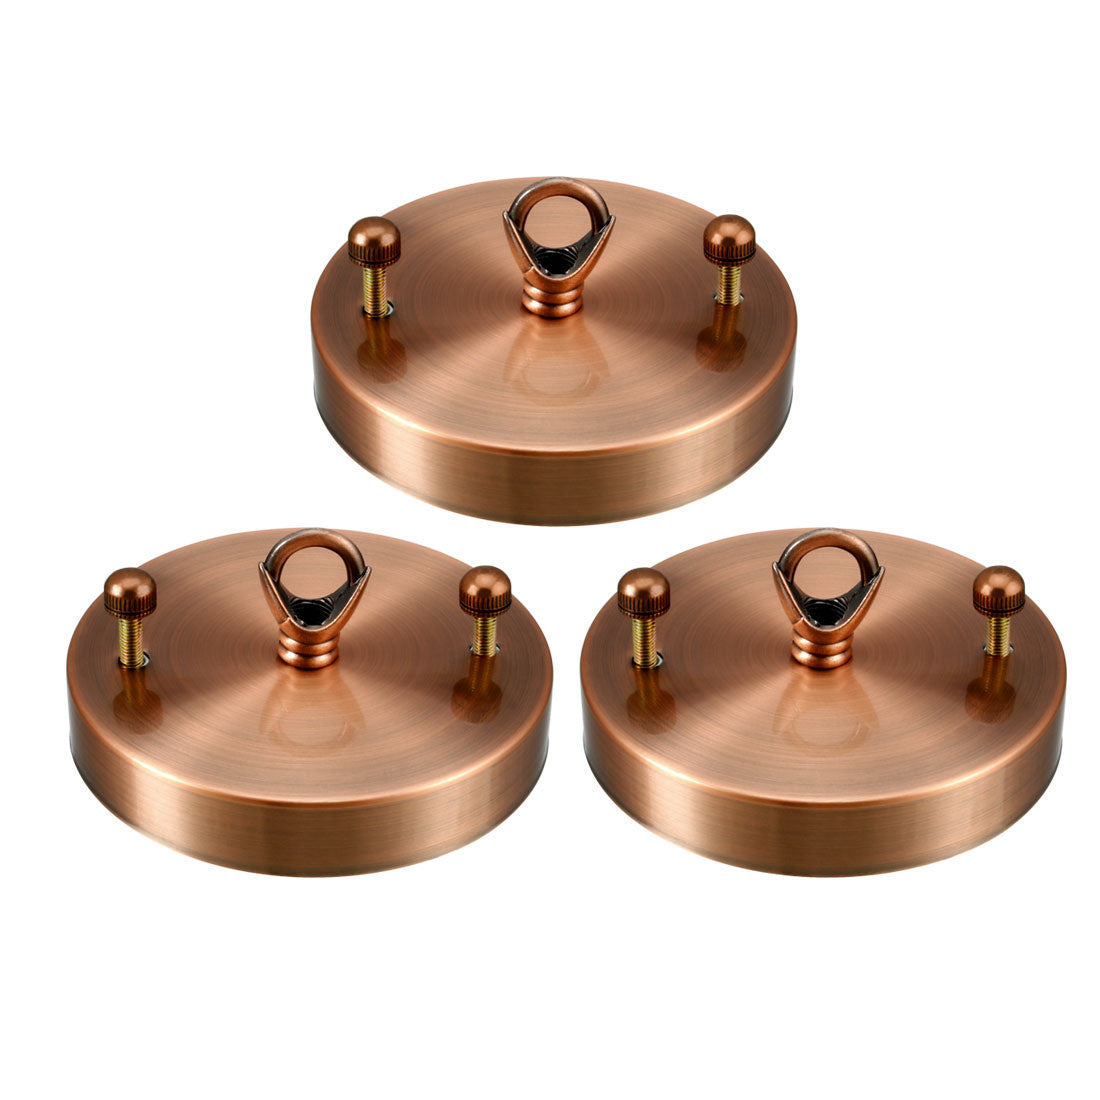 uxcell Uxcell Retro Ceiling Light Plate Pointed Base Chassis Disc Pendant Accessories 100mmx20mm Copper Tone w Screw 3pcs